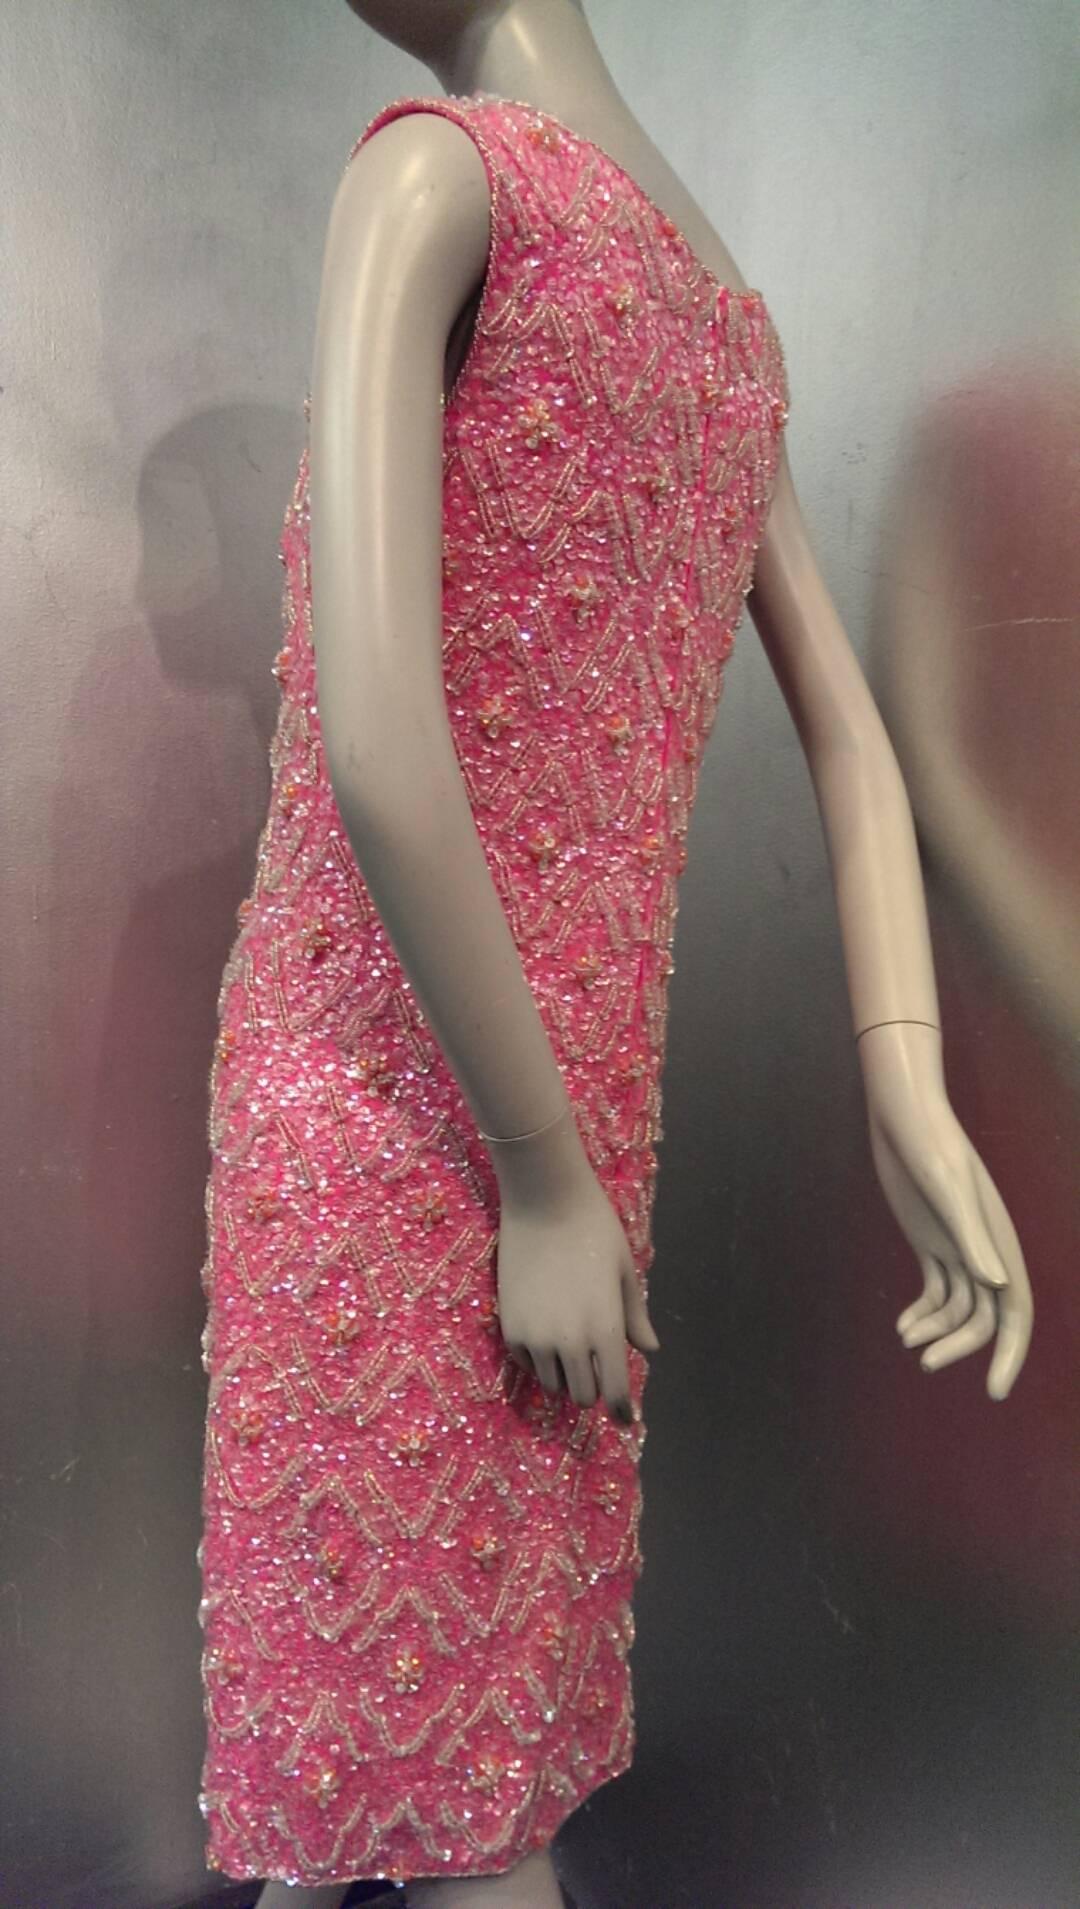 1960s I. Magnin vibrant pink wool knit dress with incredible diamond patterned bead and sequin embellishment all-over. Full lined. Back zipper. 